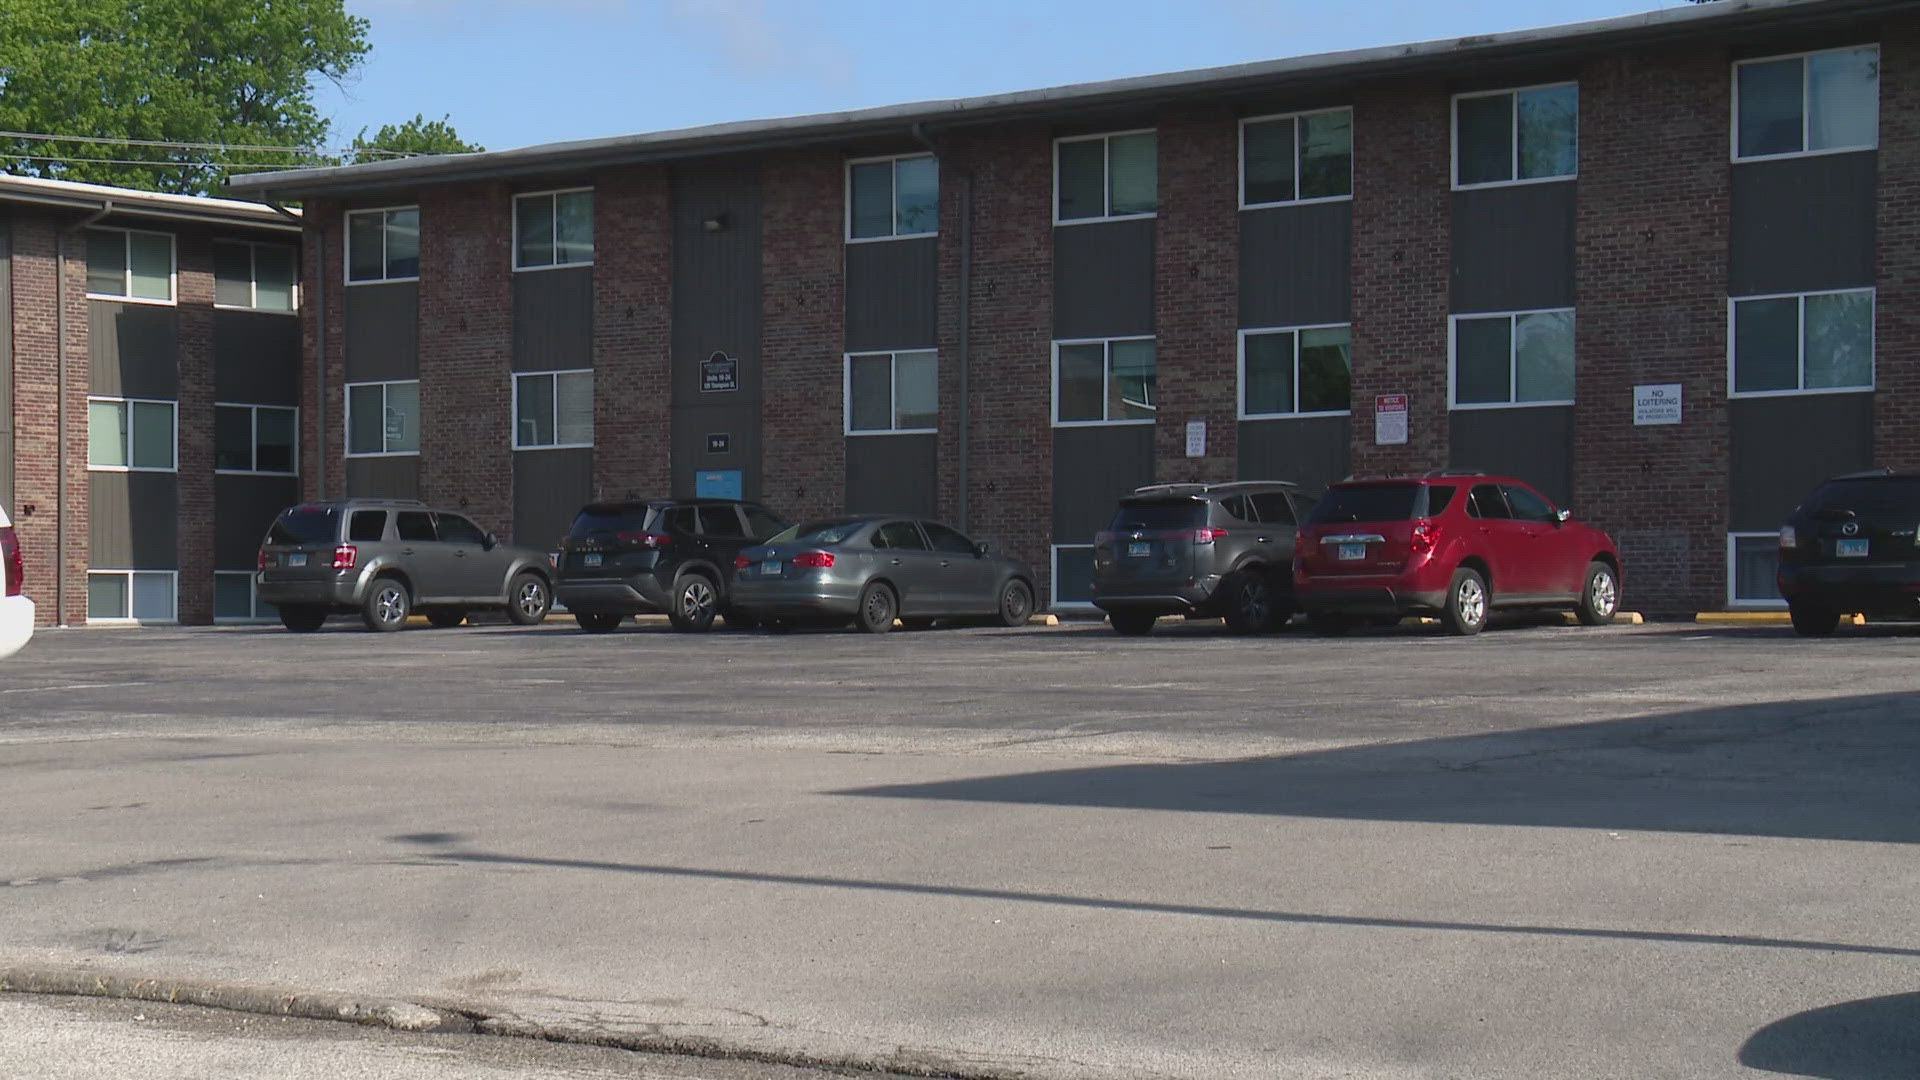 A man was found dead from a gunshot wound on the parking lot of an apartment complex. The Wood River police said the incident "appears to be an isolated event."